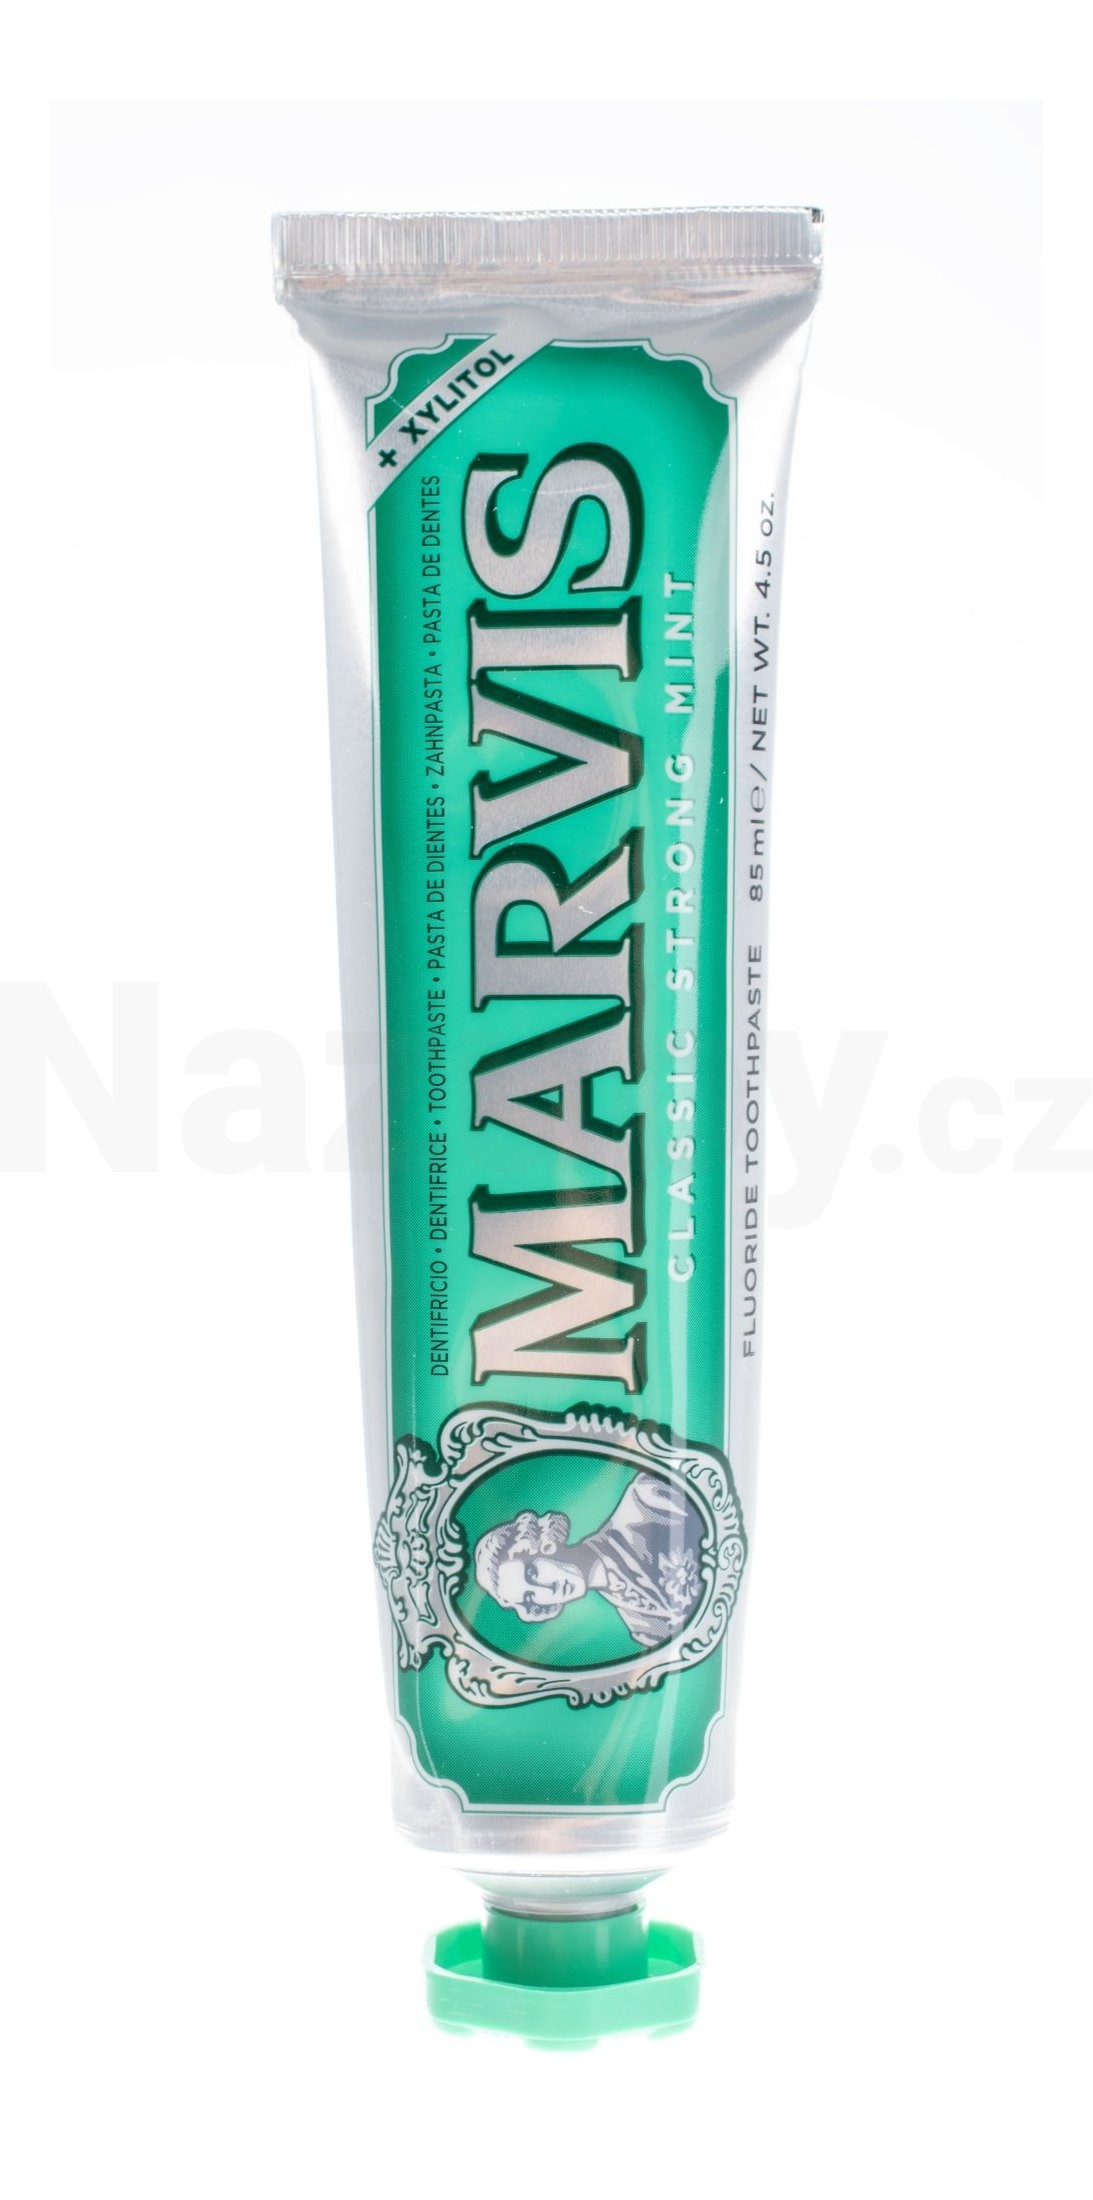 Marvis Classic Strong Mint zubní pasta 85 ml